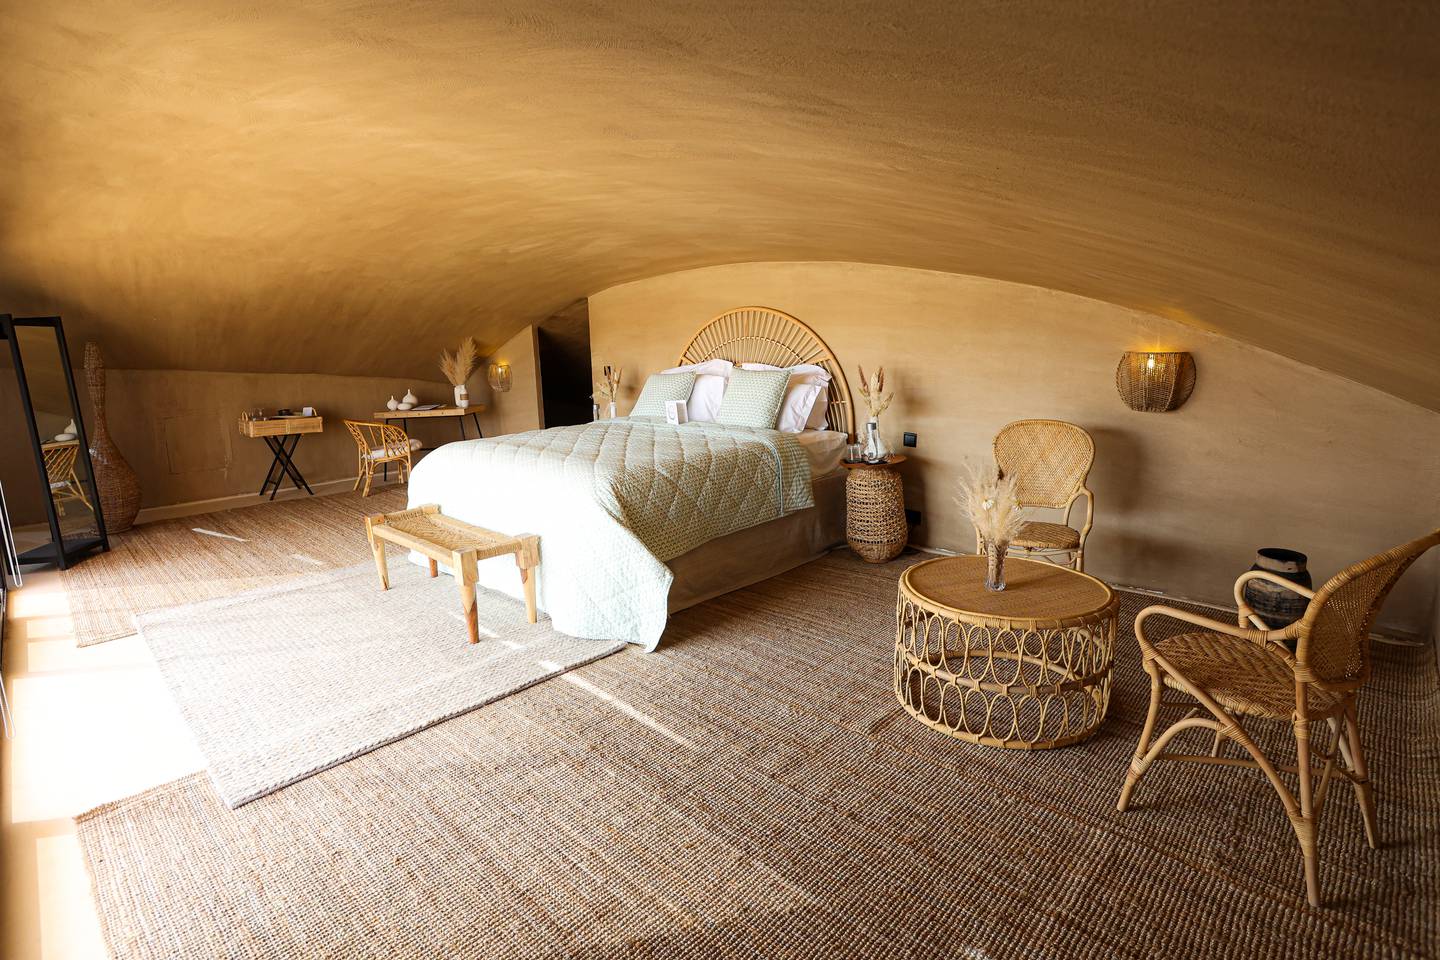 Inside one of the camp's 'nests'. Photo: The Nest by Sonara